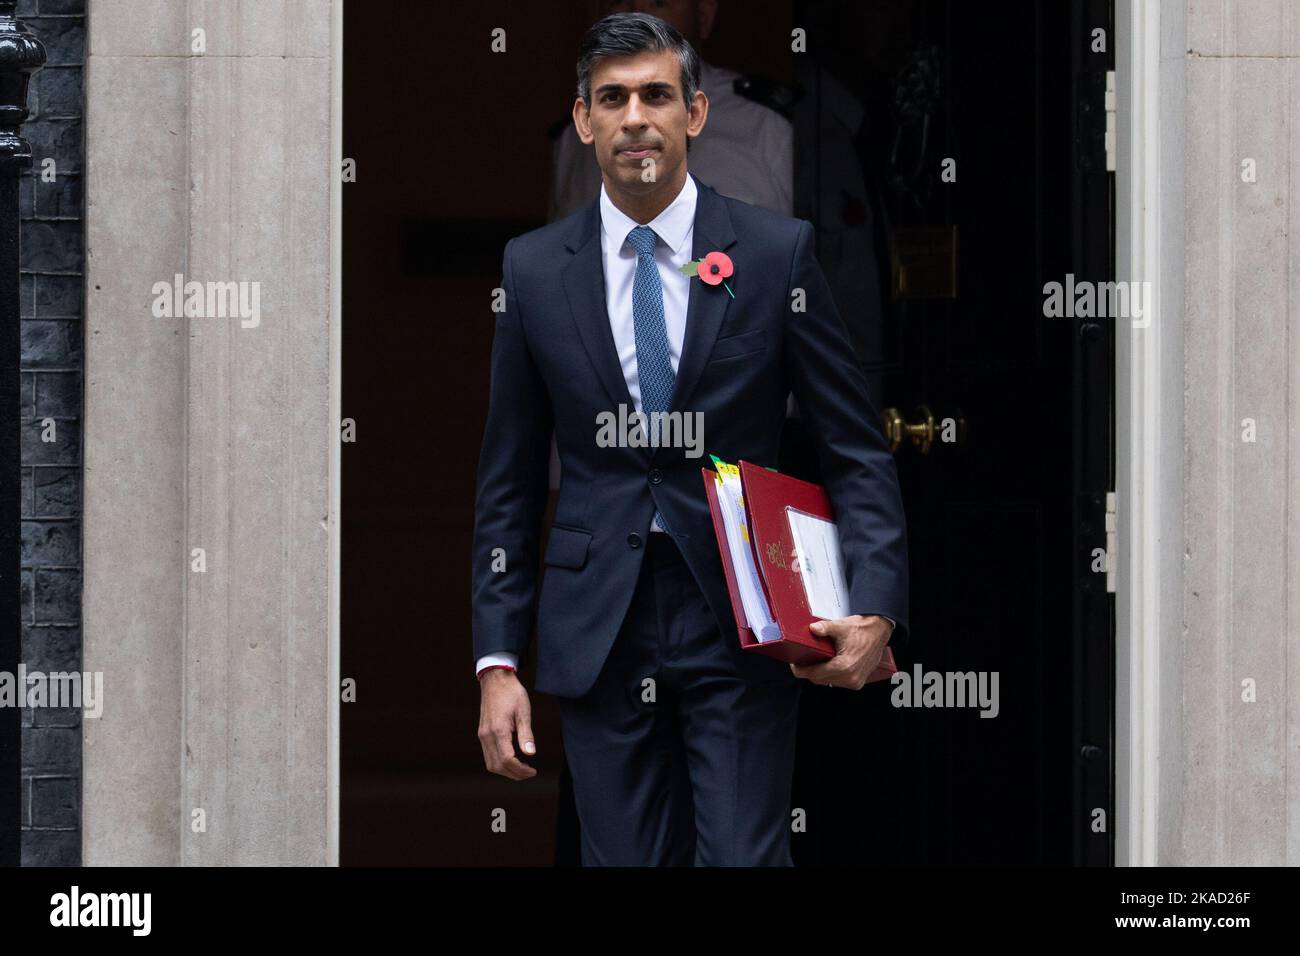 London, UK. 02nd Nov, 2022. London, UK, 2nd November 2022. Prime Minister Rishi Sunak leaves 10 Downing Street in London to attend PMQs on 2nd November 2022. Credit: Lucy North/Alamy Live News Stock Photo